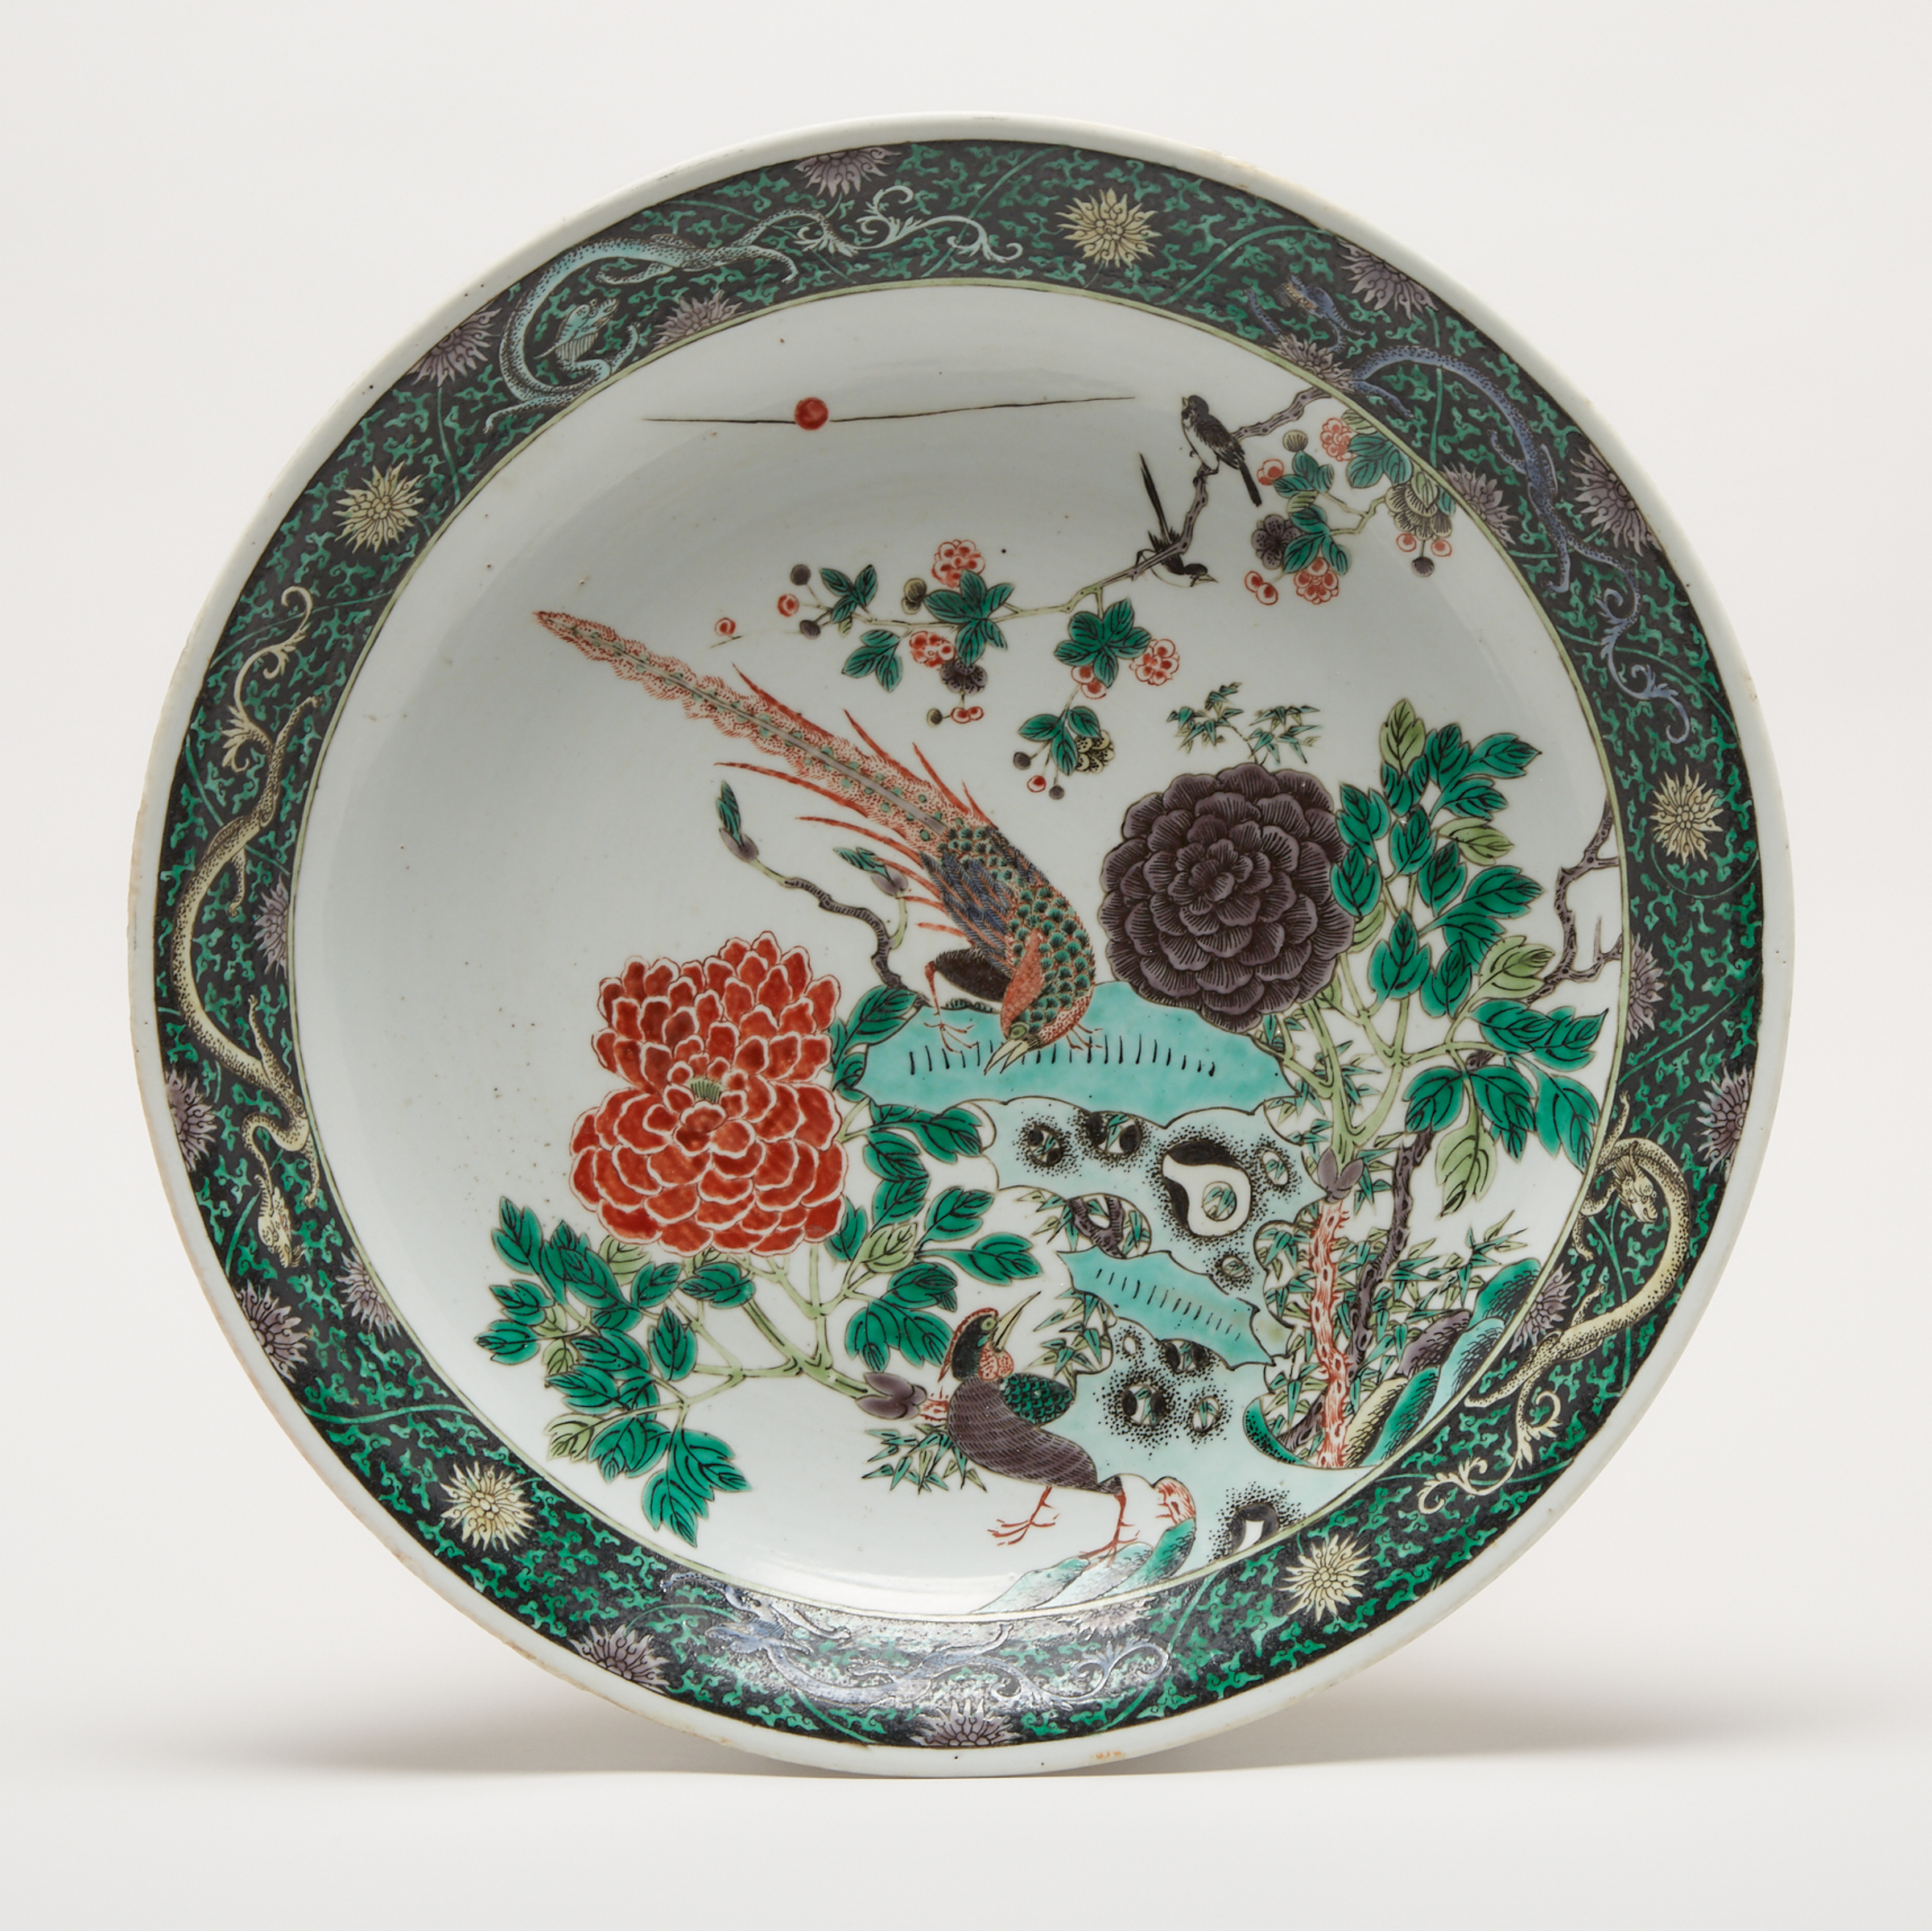 A Large Famille Verte Dish with Birds, Kangxi Period (1664-1722)